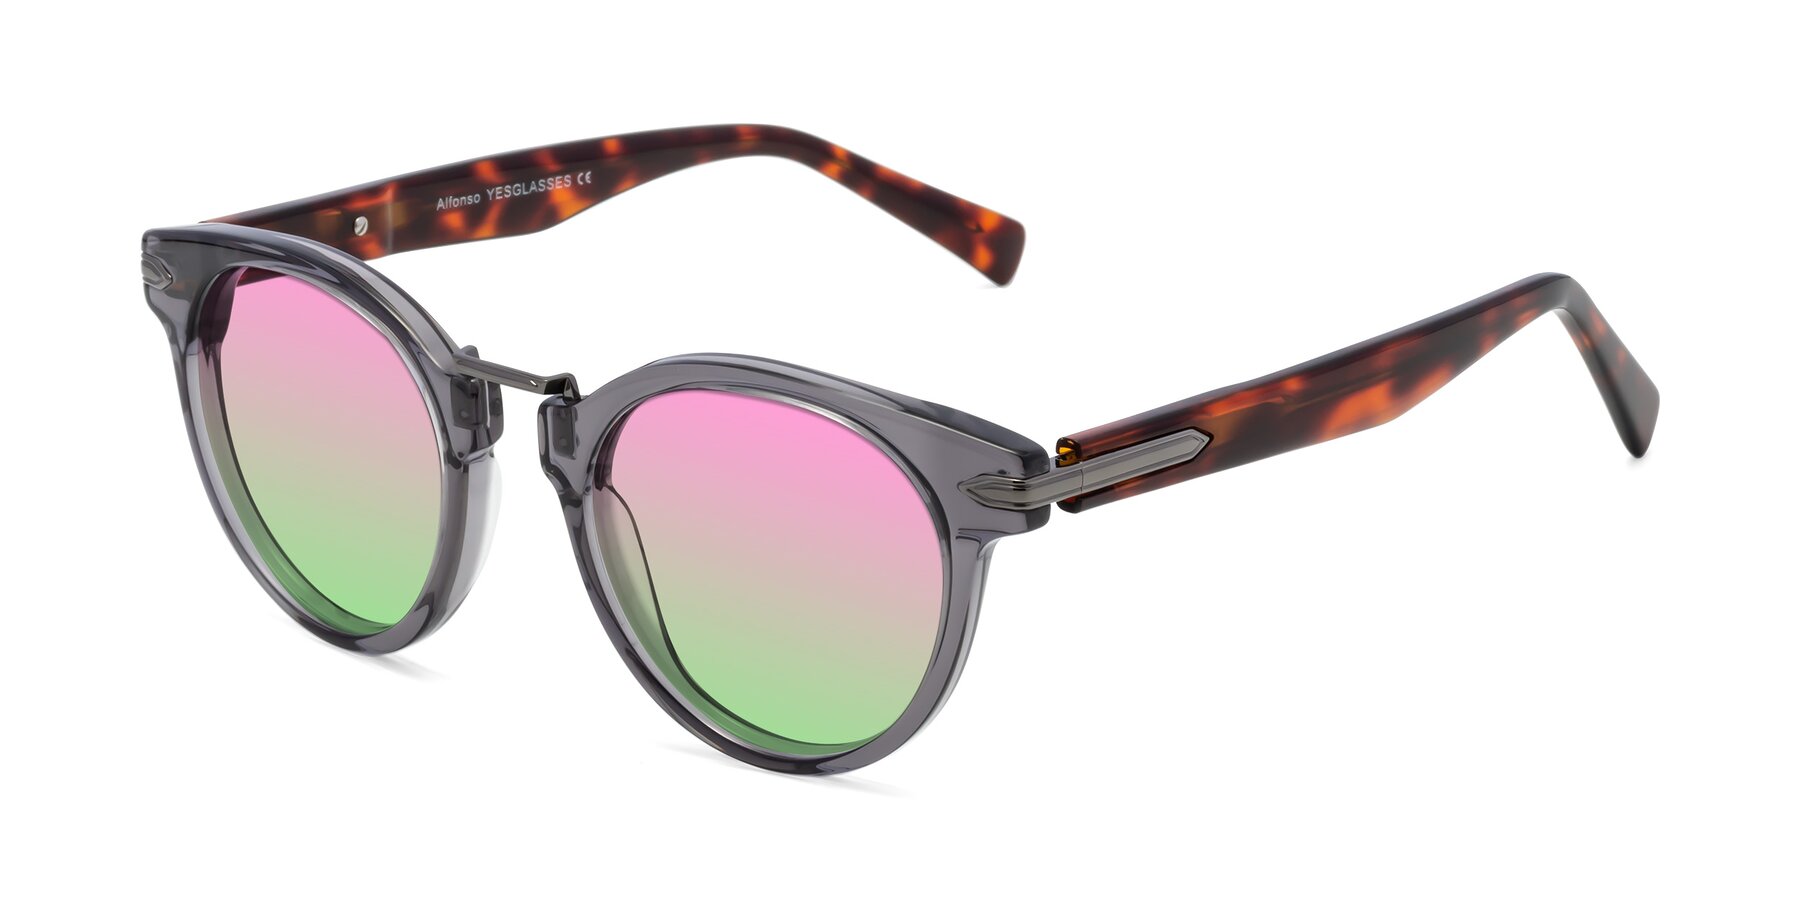 Angle of Alfonso in Gray /Tortoise with Pink / Green Gradient Lenses